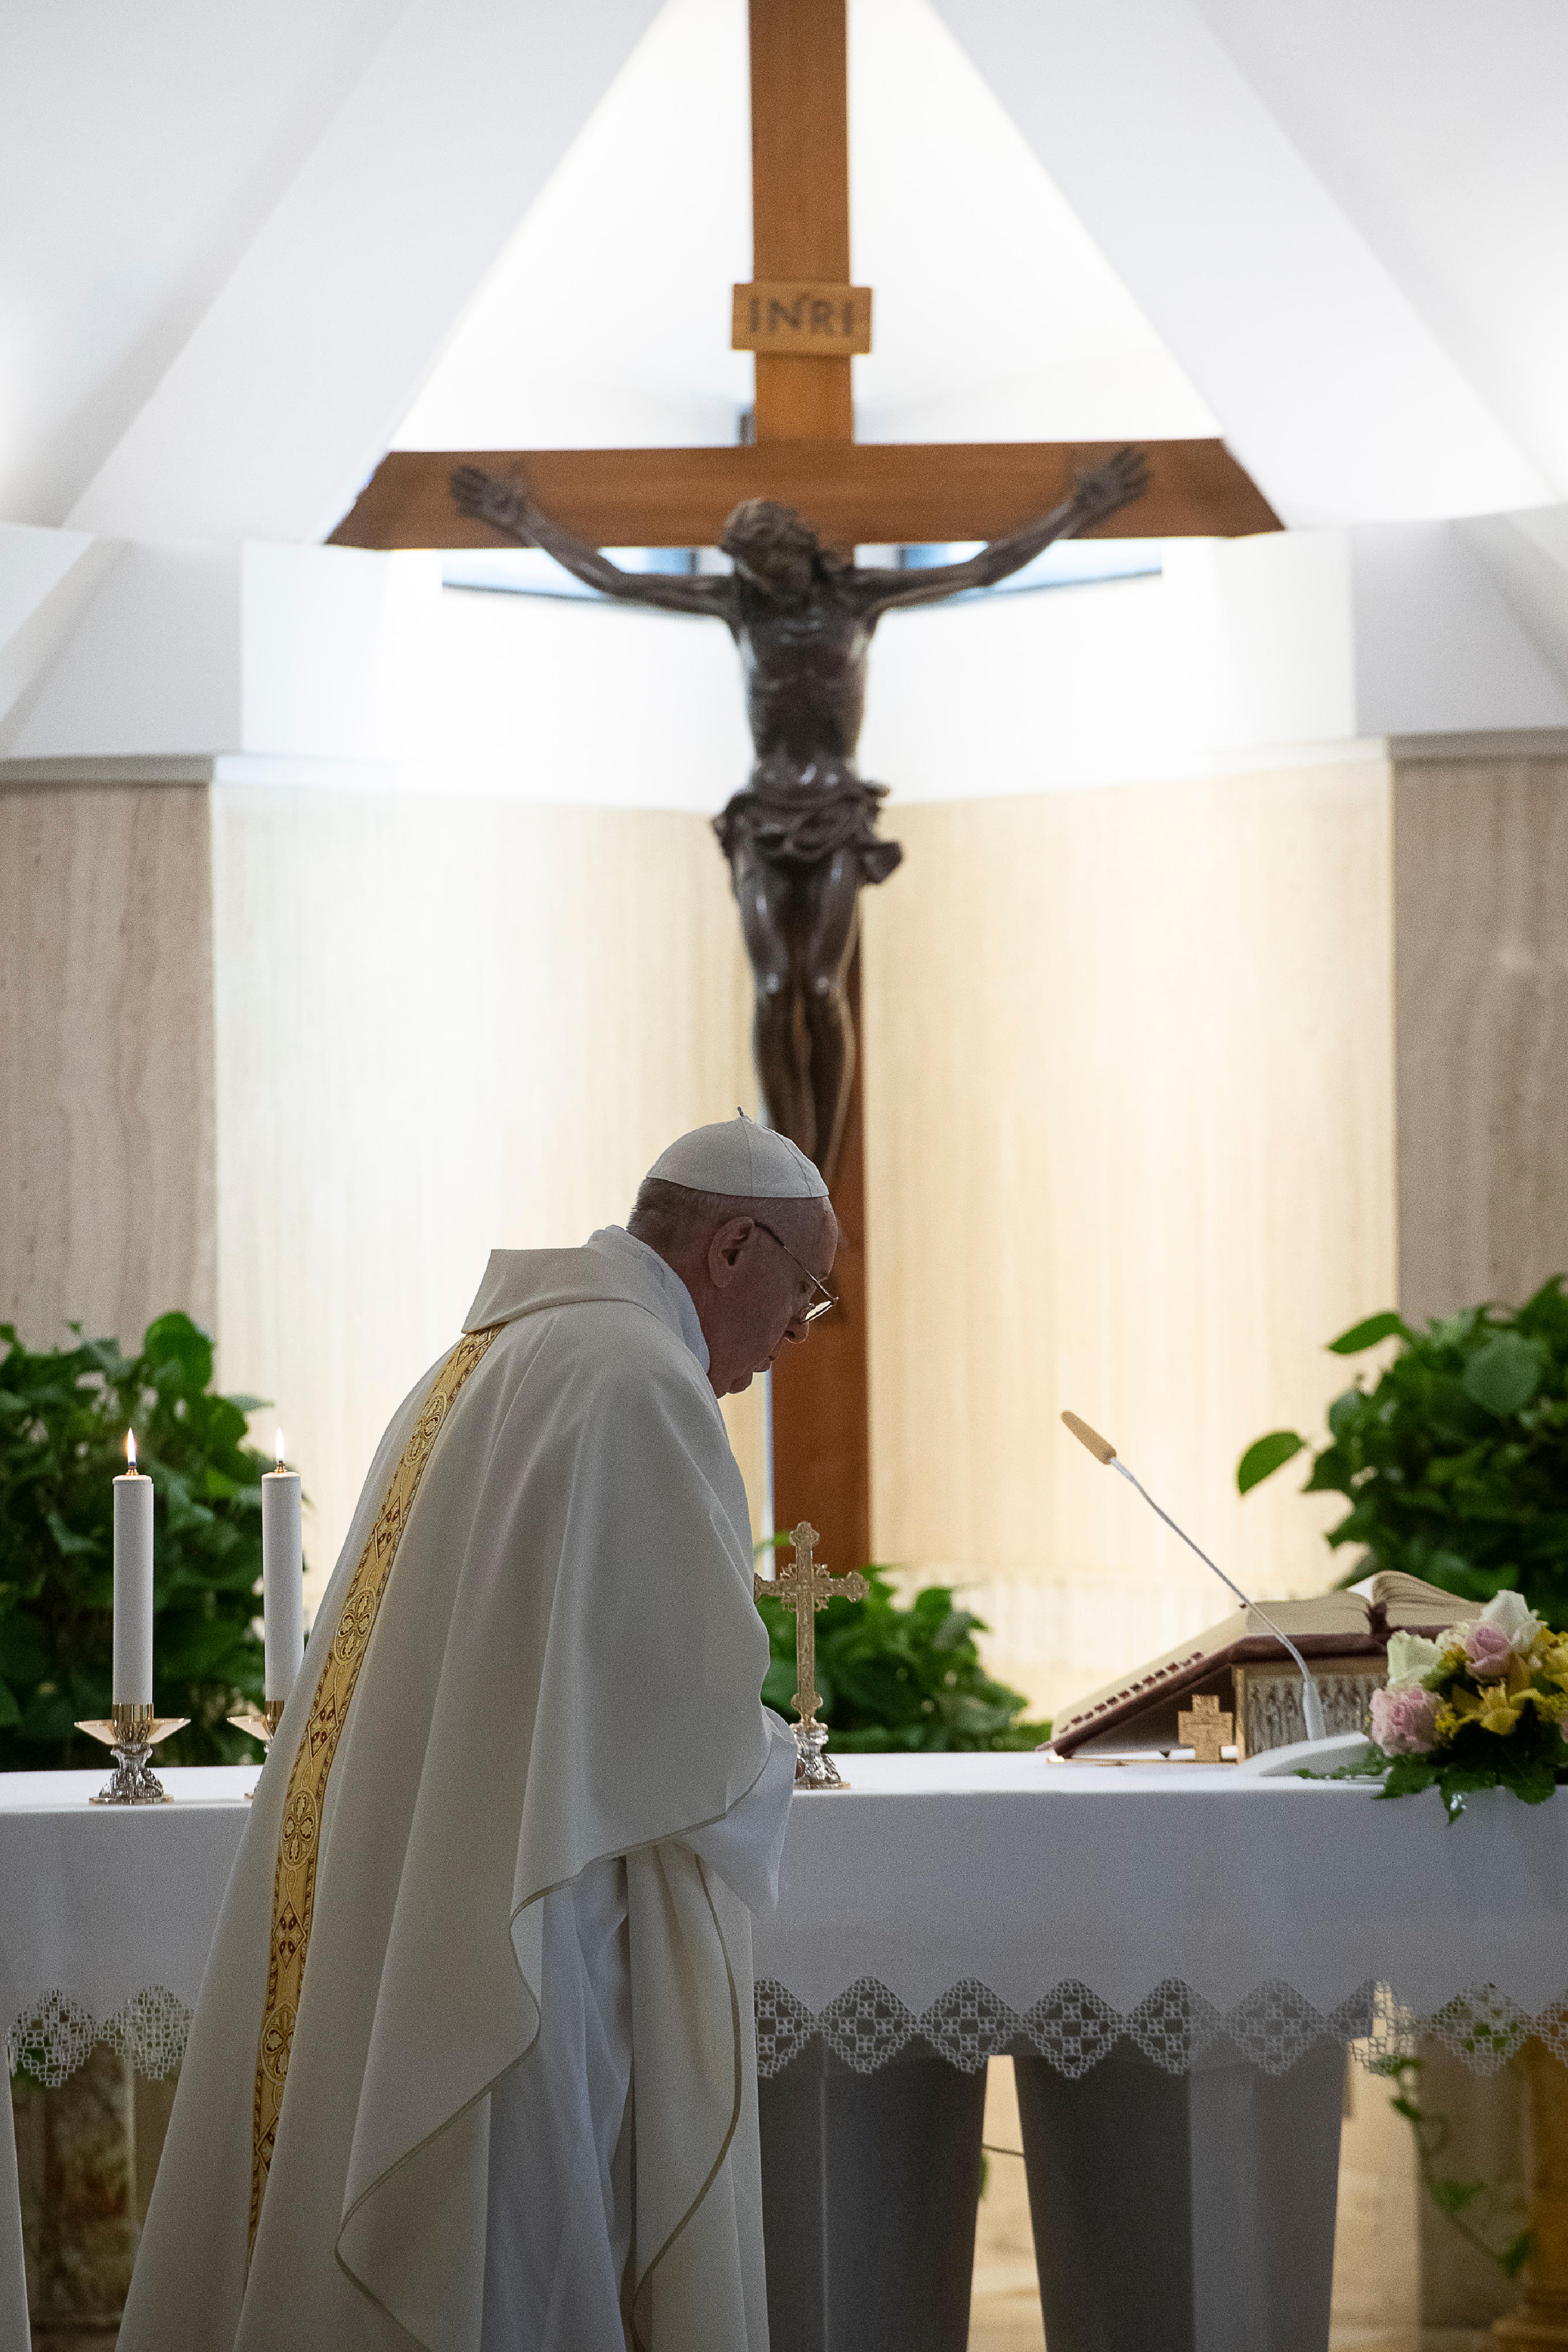 Holy Spirit keeps Christians young at heart, pope says